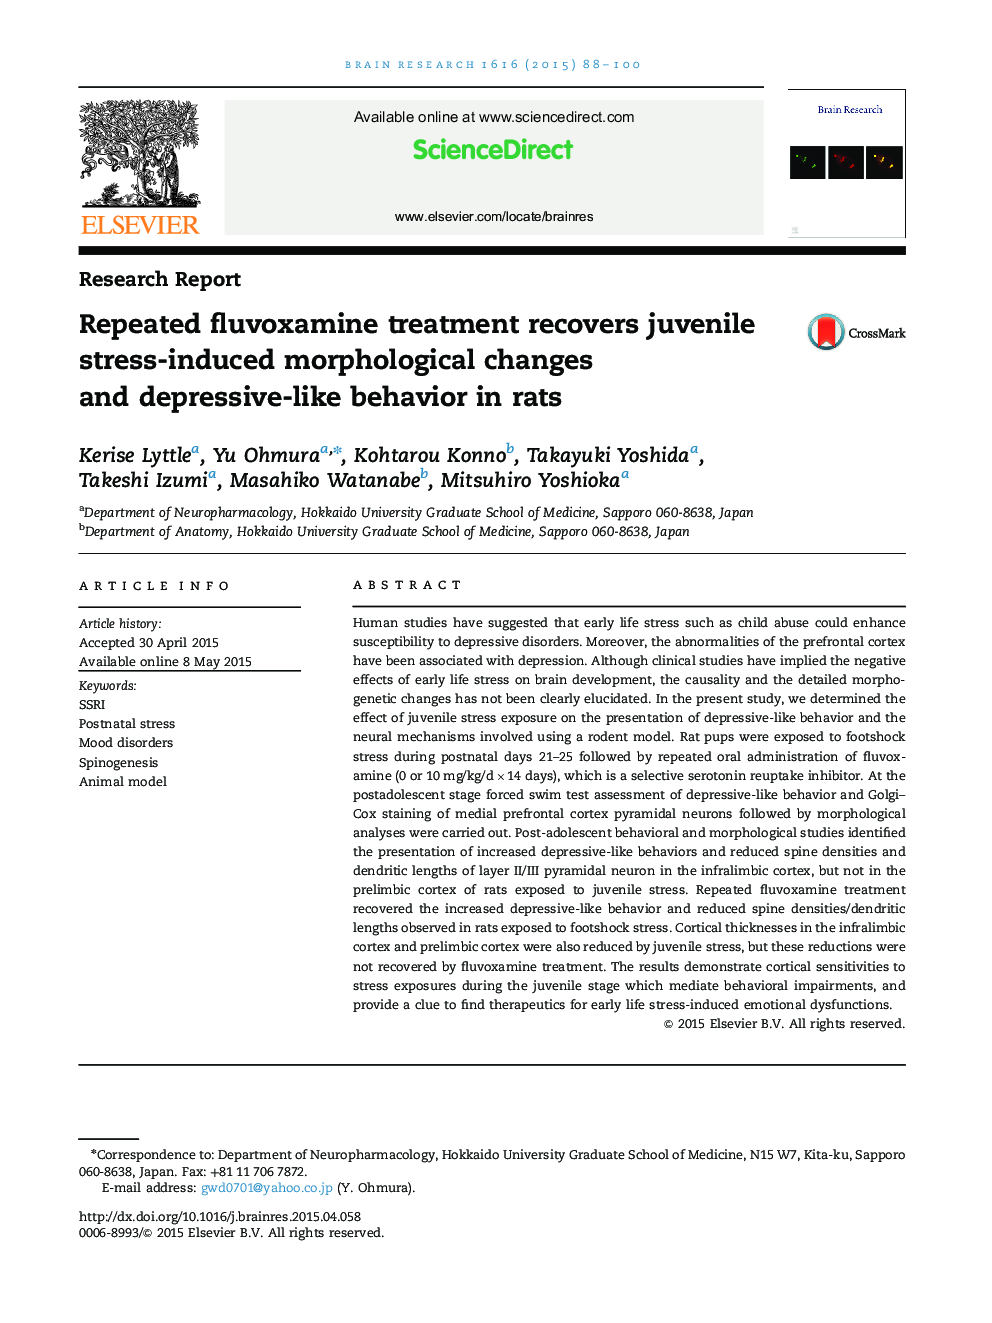 Repeated fluvoxamine treatment recovers juvenile stress-induced morphological changes and depressive-like behavior in rats